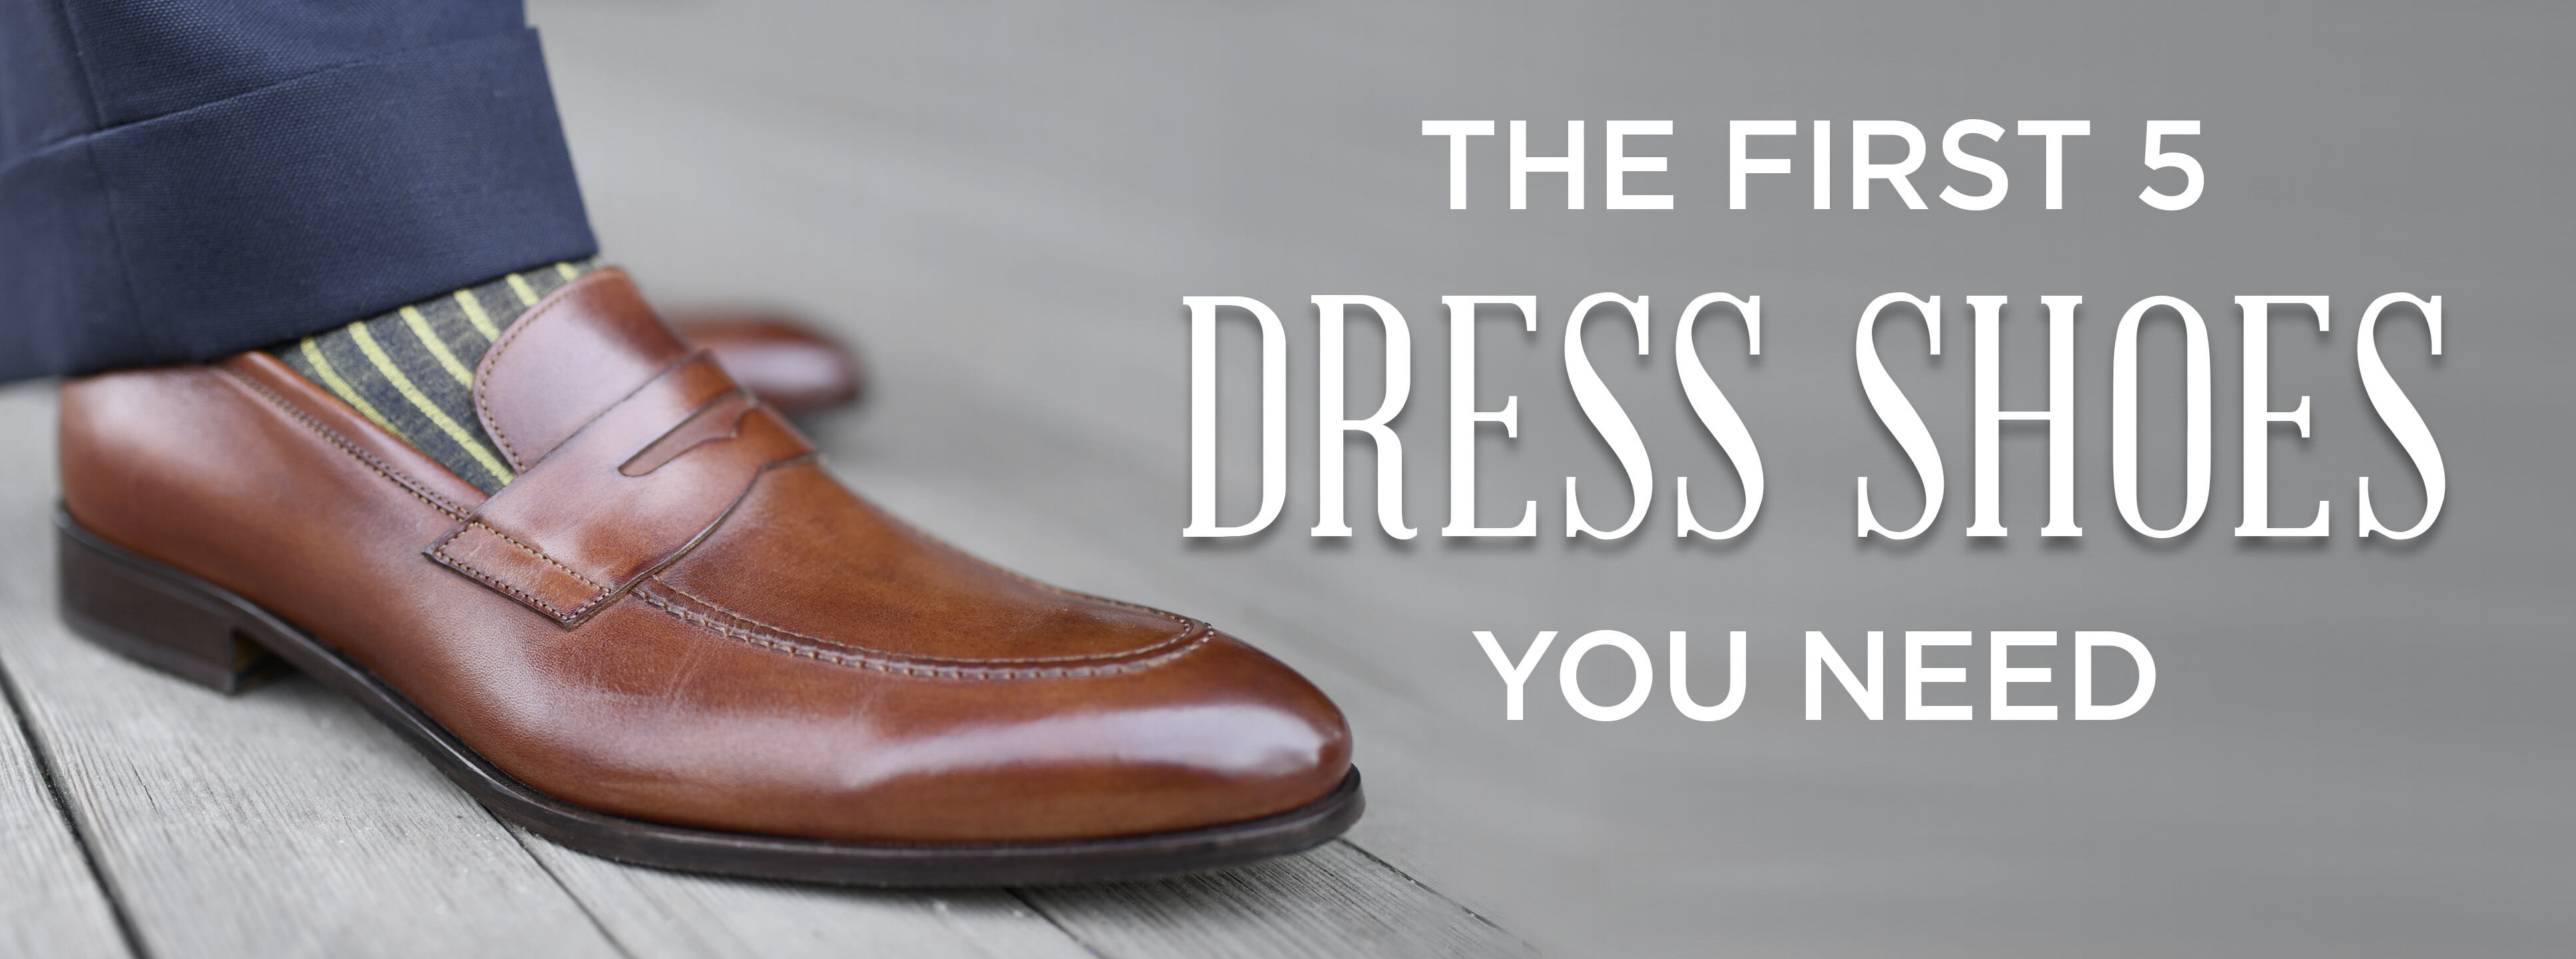 The First 5 Dress Shoes You Need To 